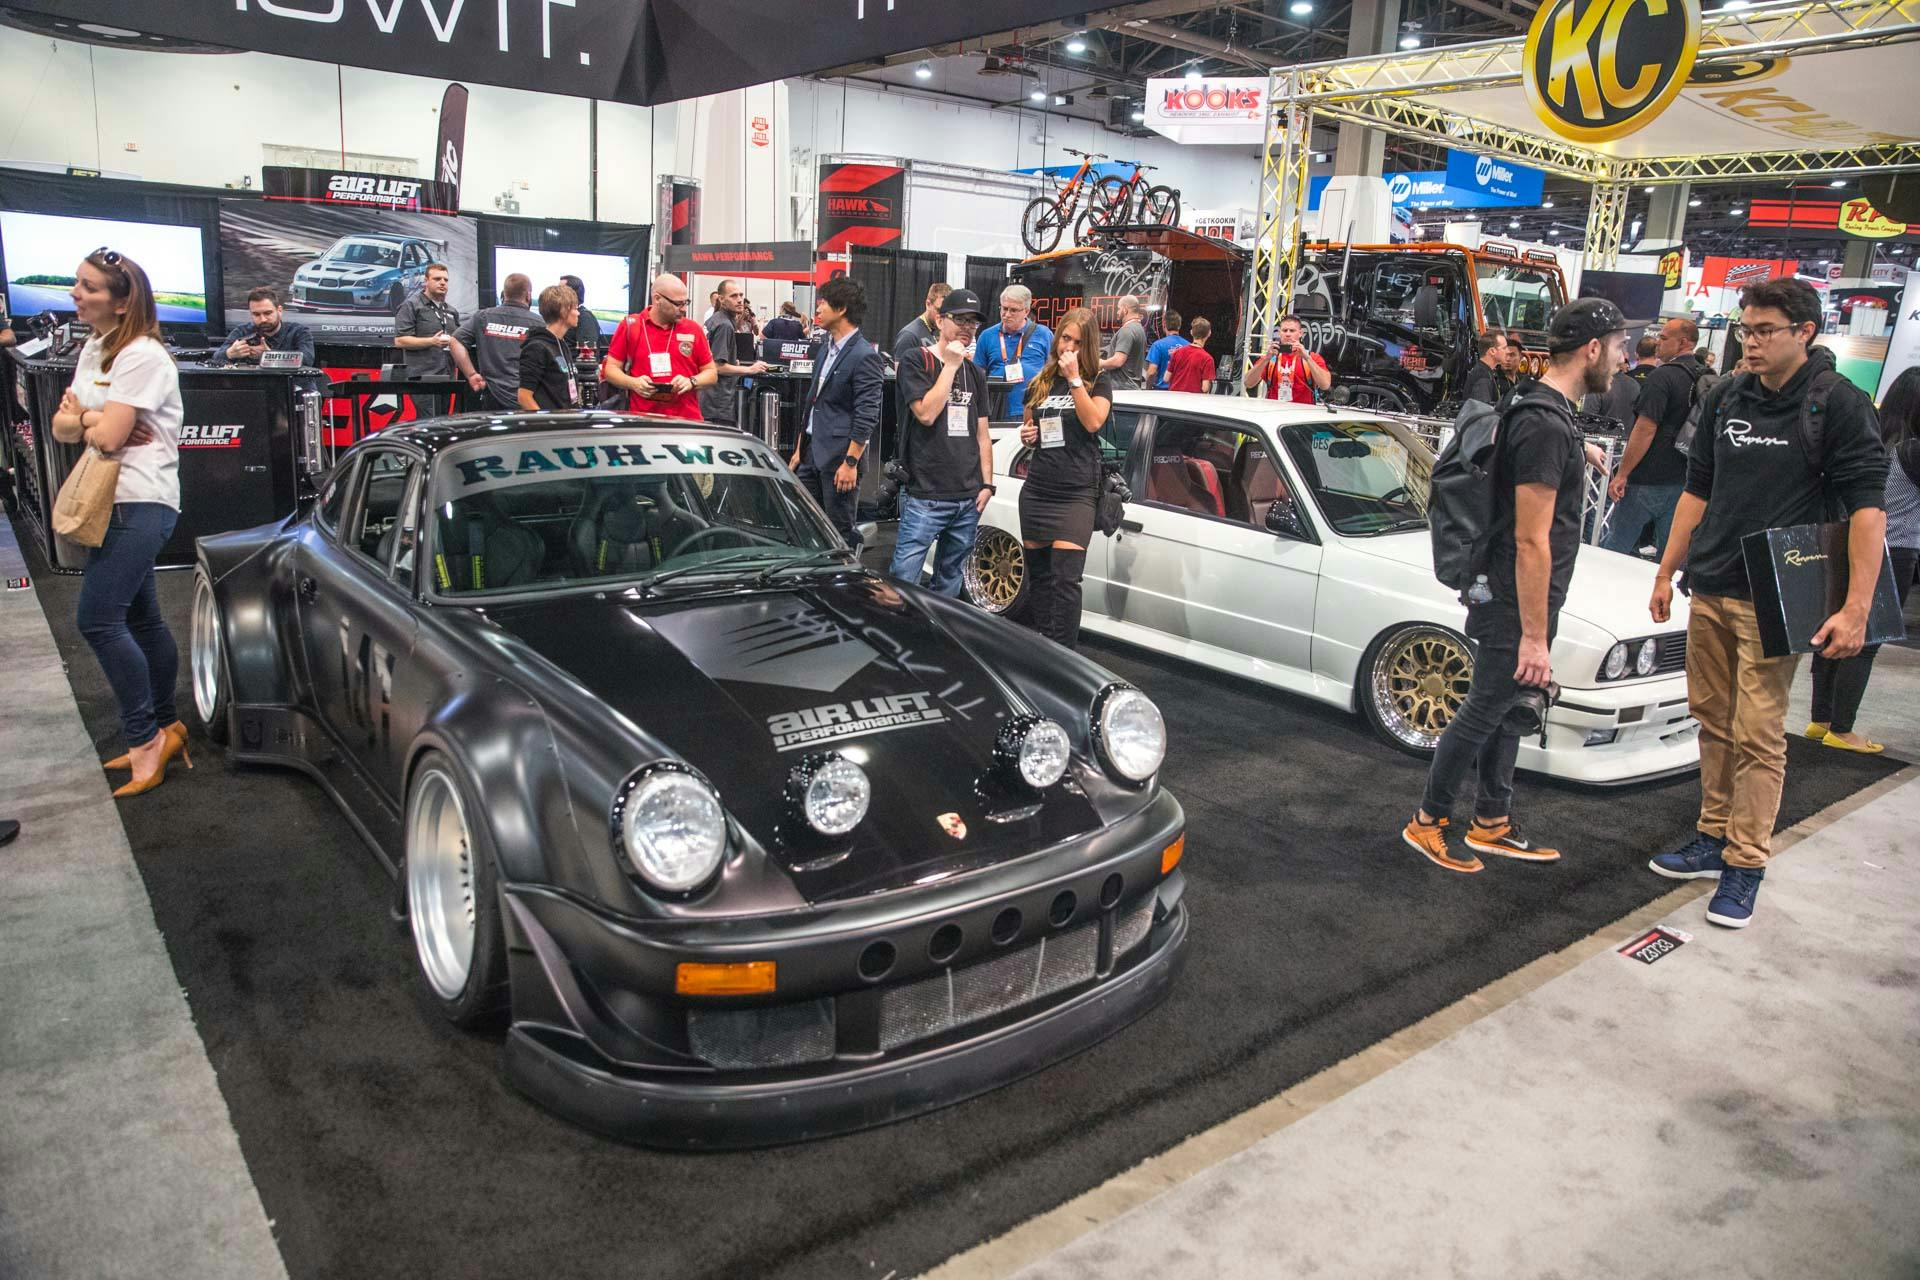 Porsche 964 Need for Speed Build at 2016 SEMA